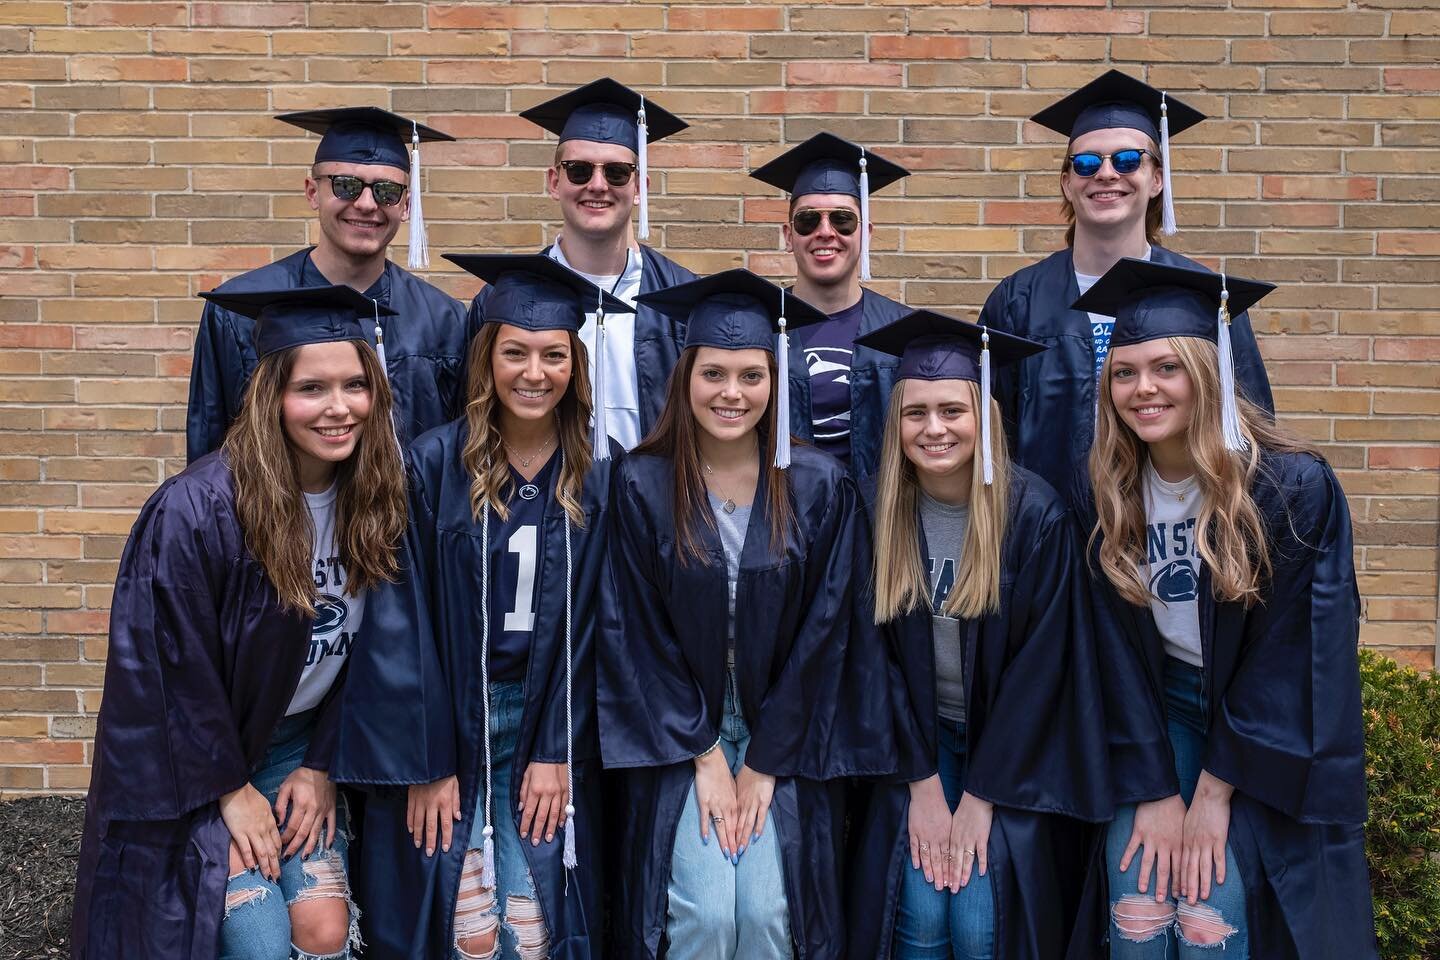 Congratulations to all of our graduating seniors! We will miss each and every one of you and wish you the best on all of your future endeavors!